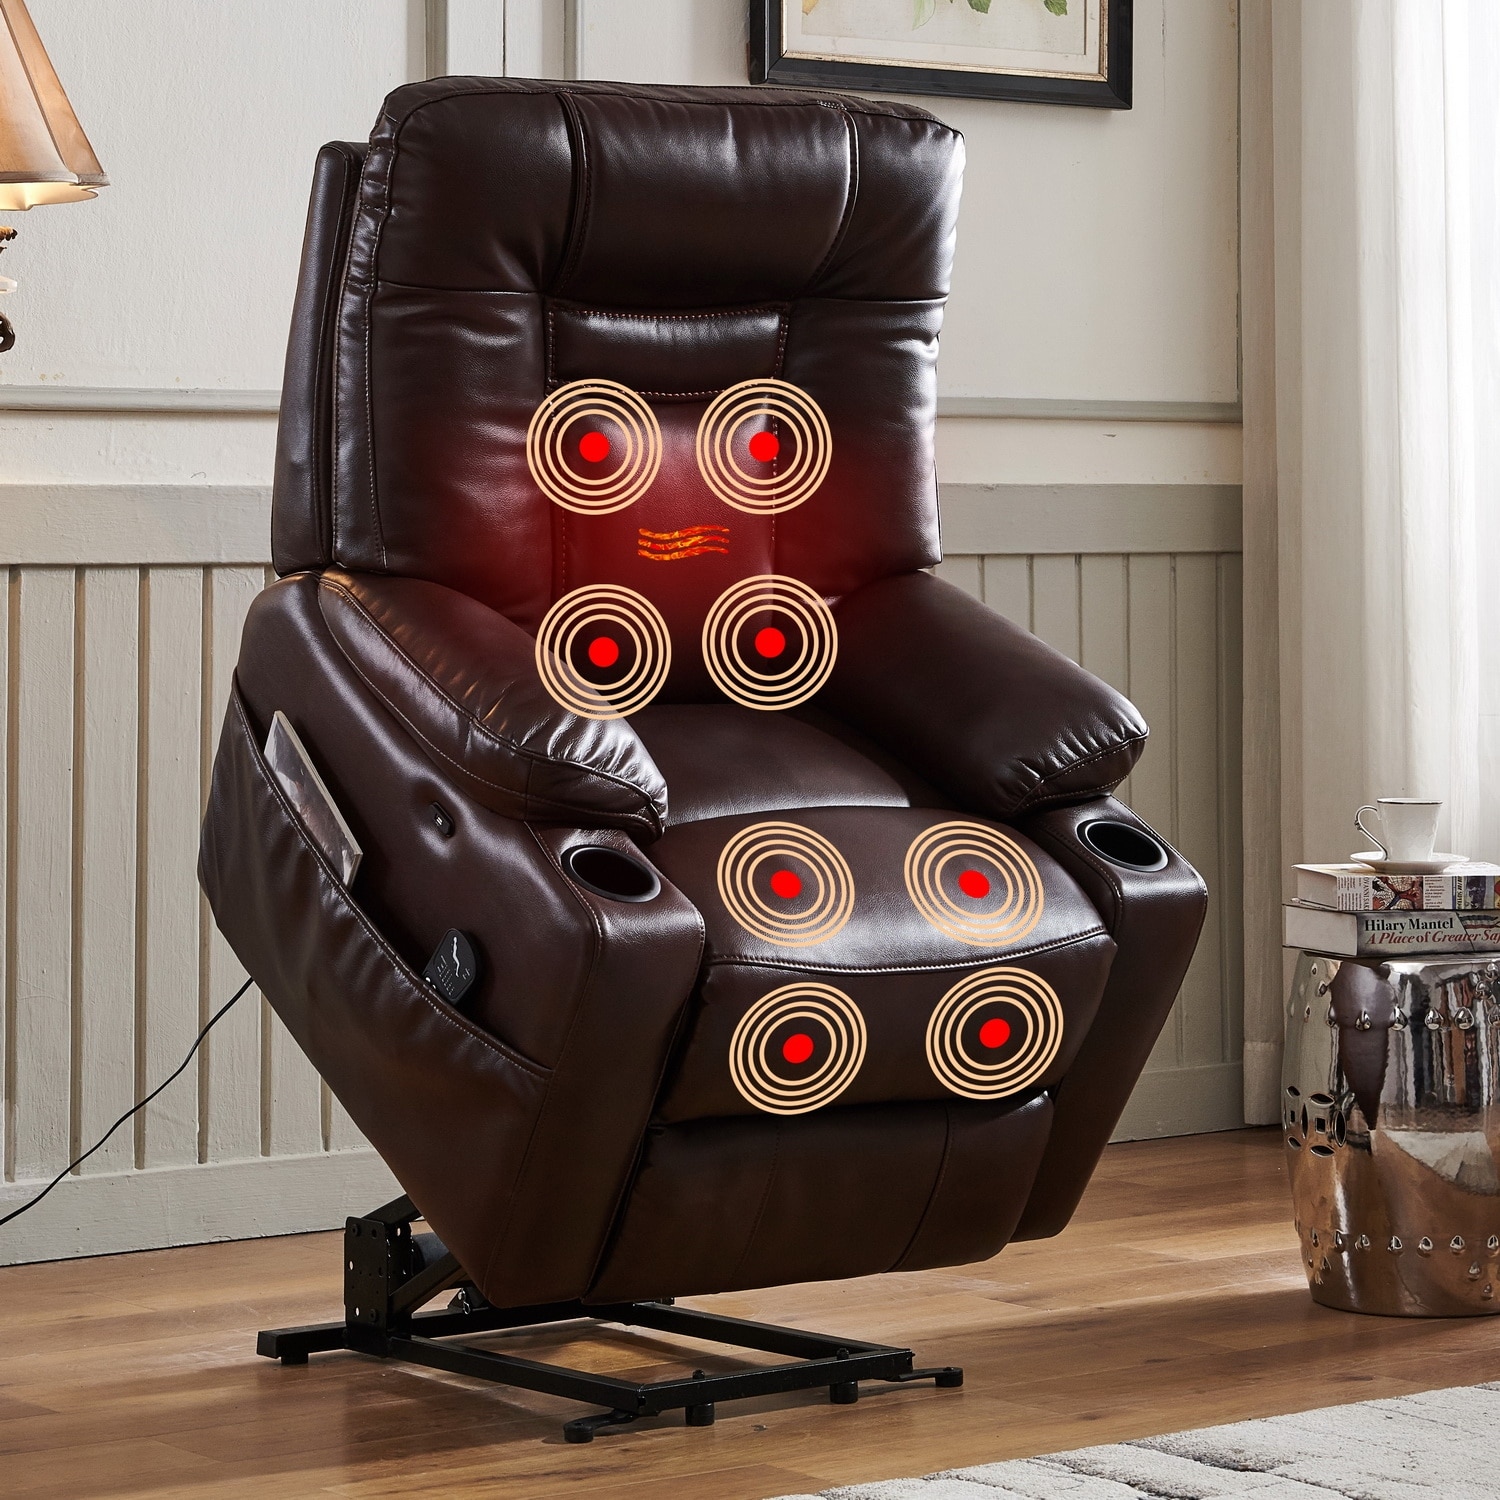 https://ak1.ostkcdn.com/images/products/is/images/direct/6a605eff75858f68f634576d7b4fa4562d2ffc3c/Leather-Gel-Power-Lift-Recliner-Chair-with-Massage-and-Heat%2C-USB-Port%2C-Extended-Footrest%2C-Cup-Holders%2C-Side-Big-Pocket.jpg